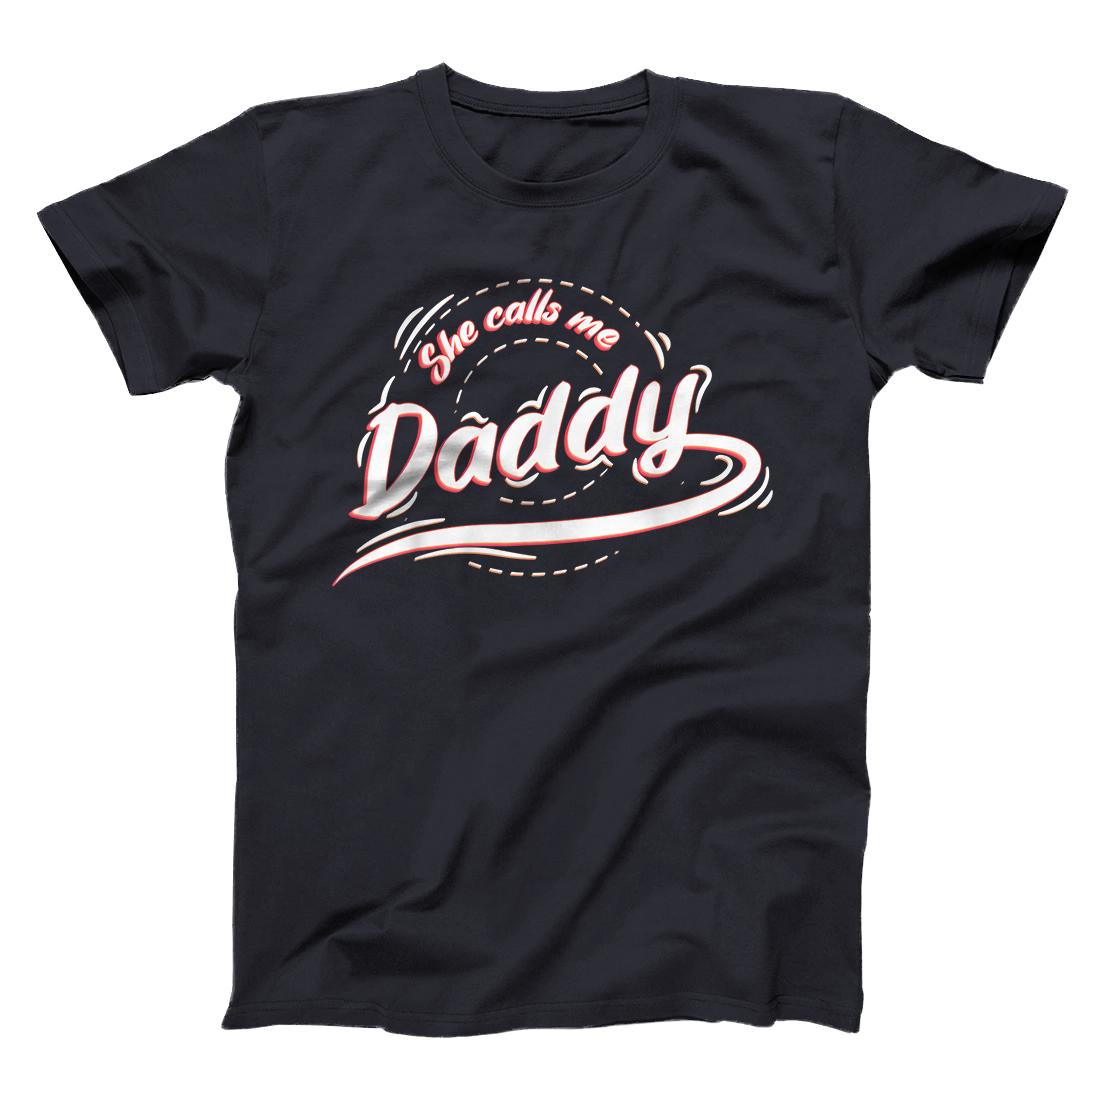 Personalized She Calls Me Daddy Naughty Sex Adult Humor T For Dad T Shirt All Star Shirt